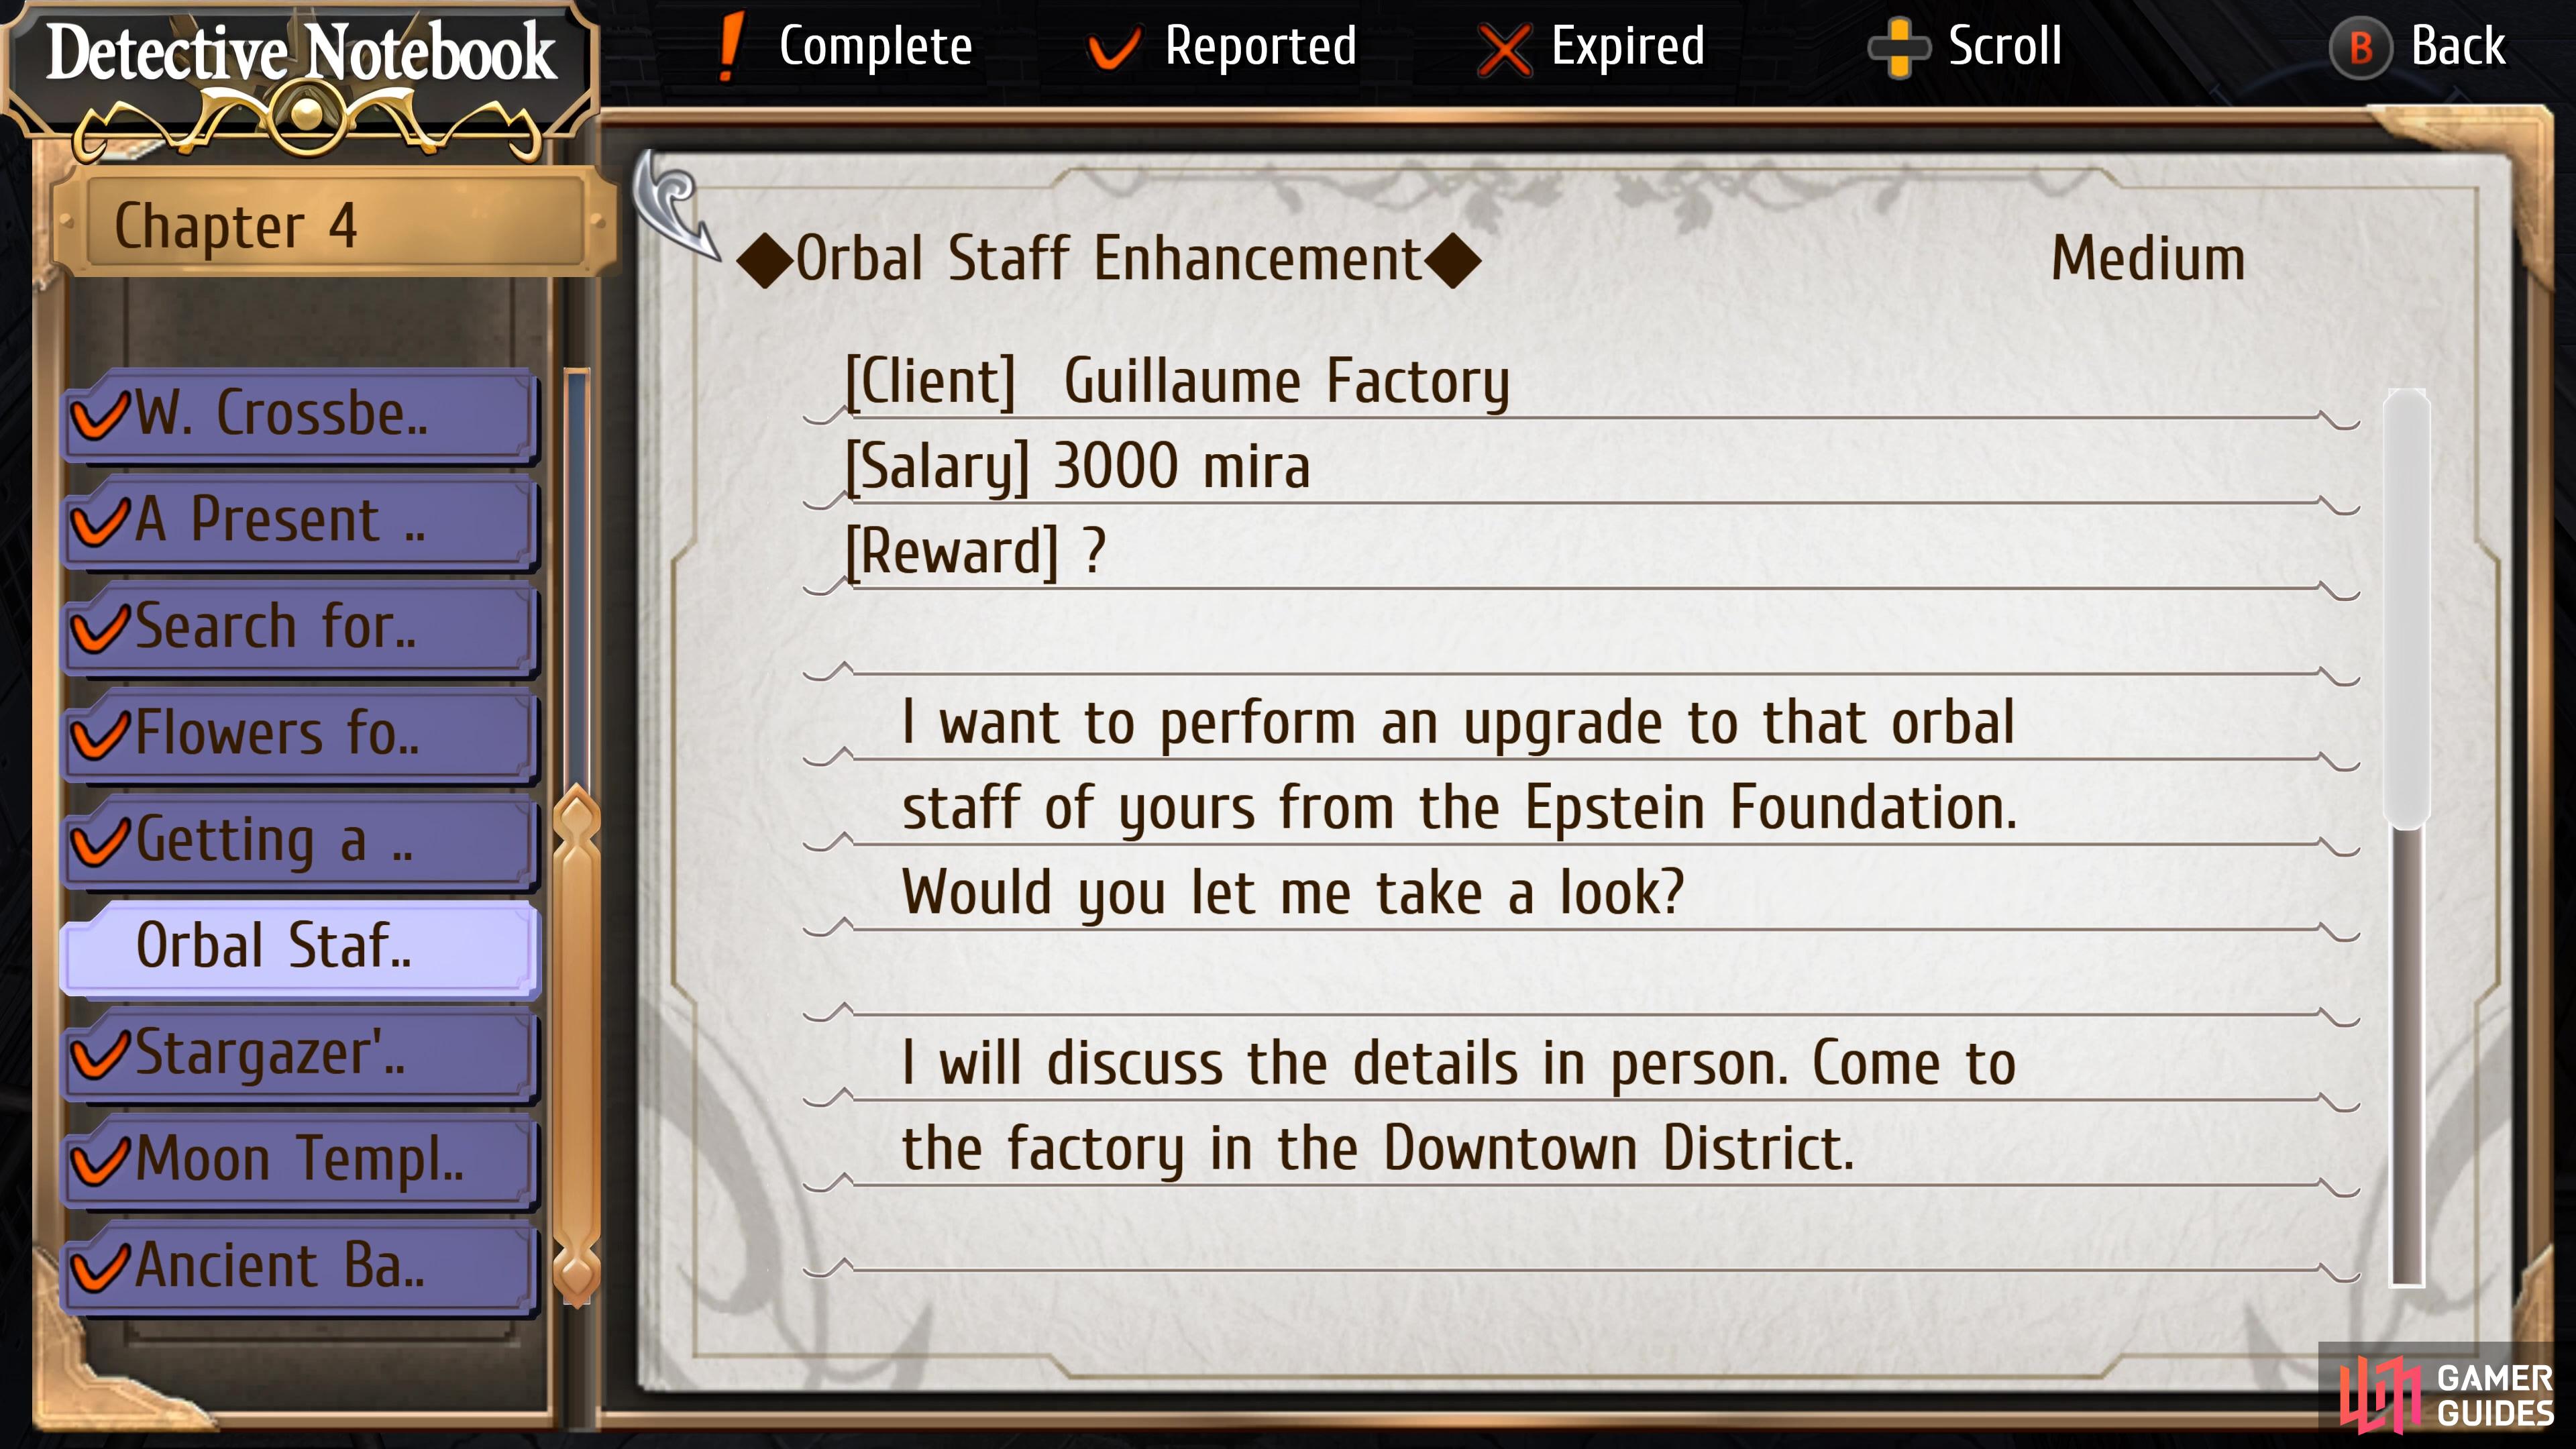 Orbal Staff Enhancement is a request on Chapter 4 Day 3.